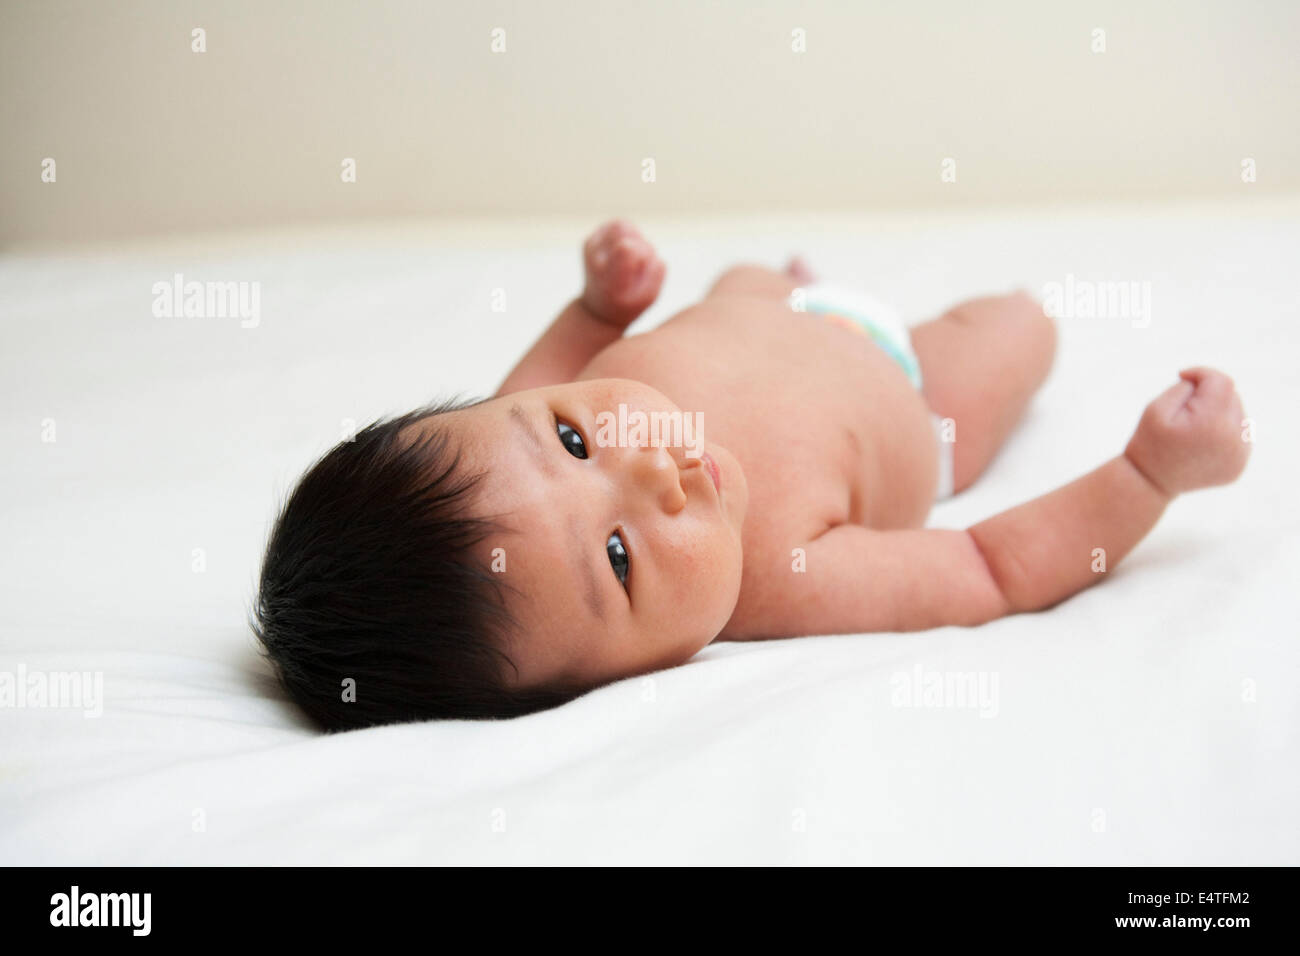 Newborn Asian baby in diaper, looking up at camera, studio shot on white background Stock Photo